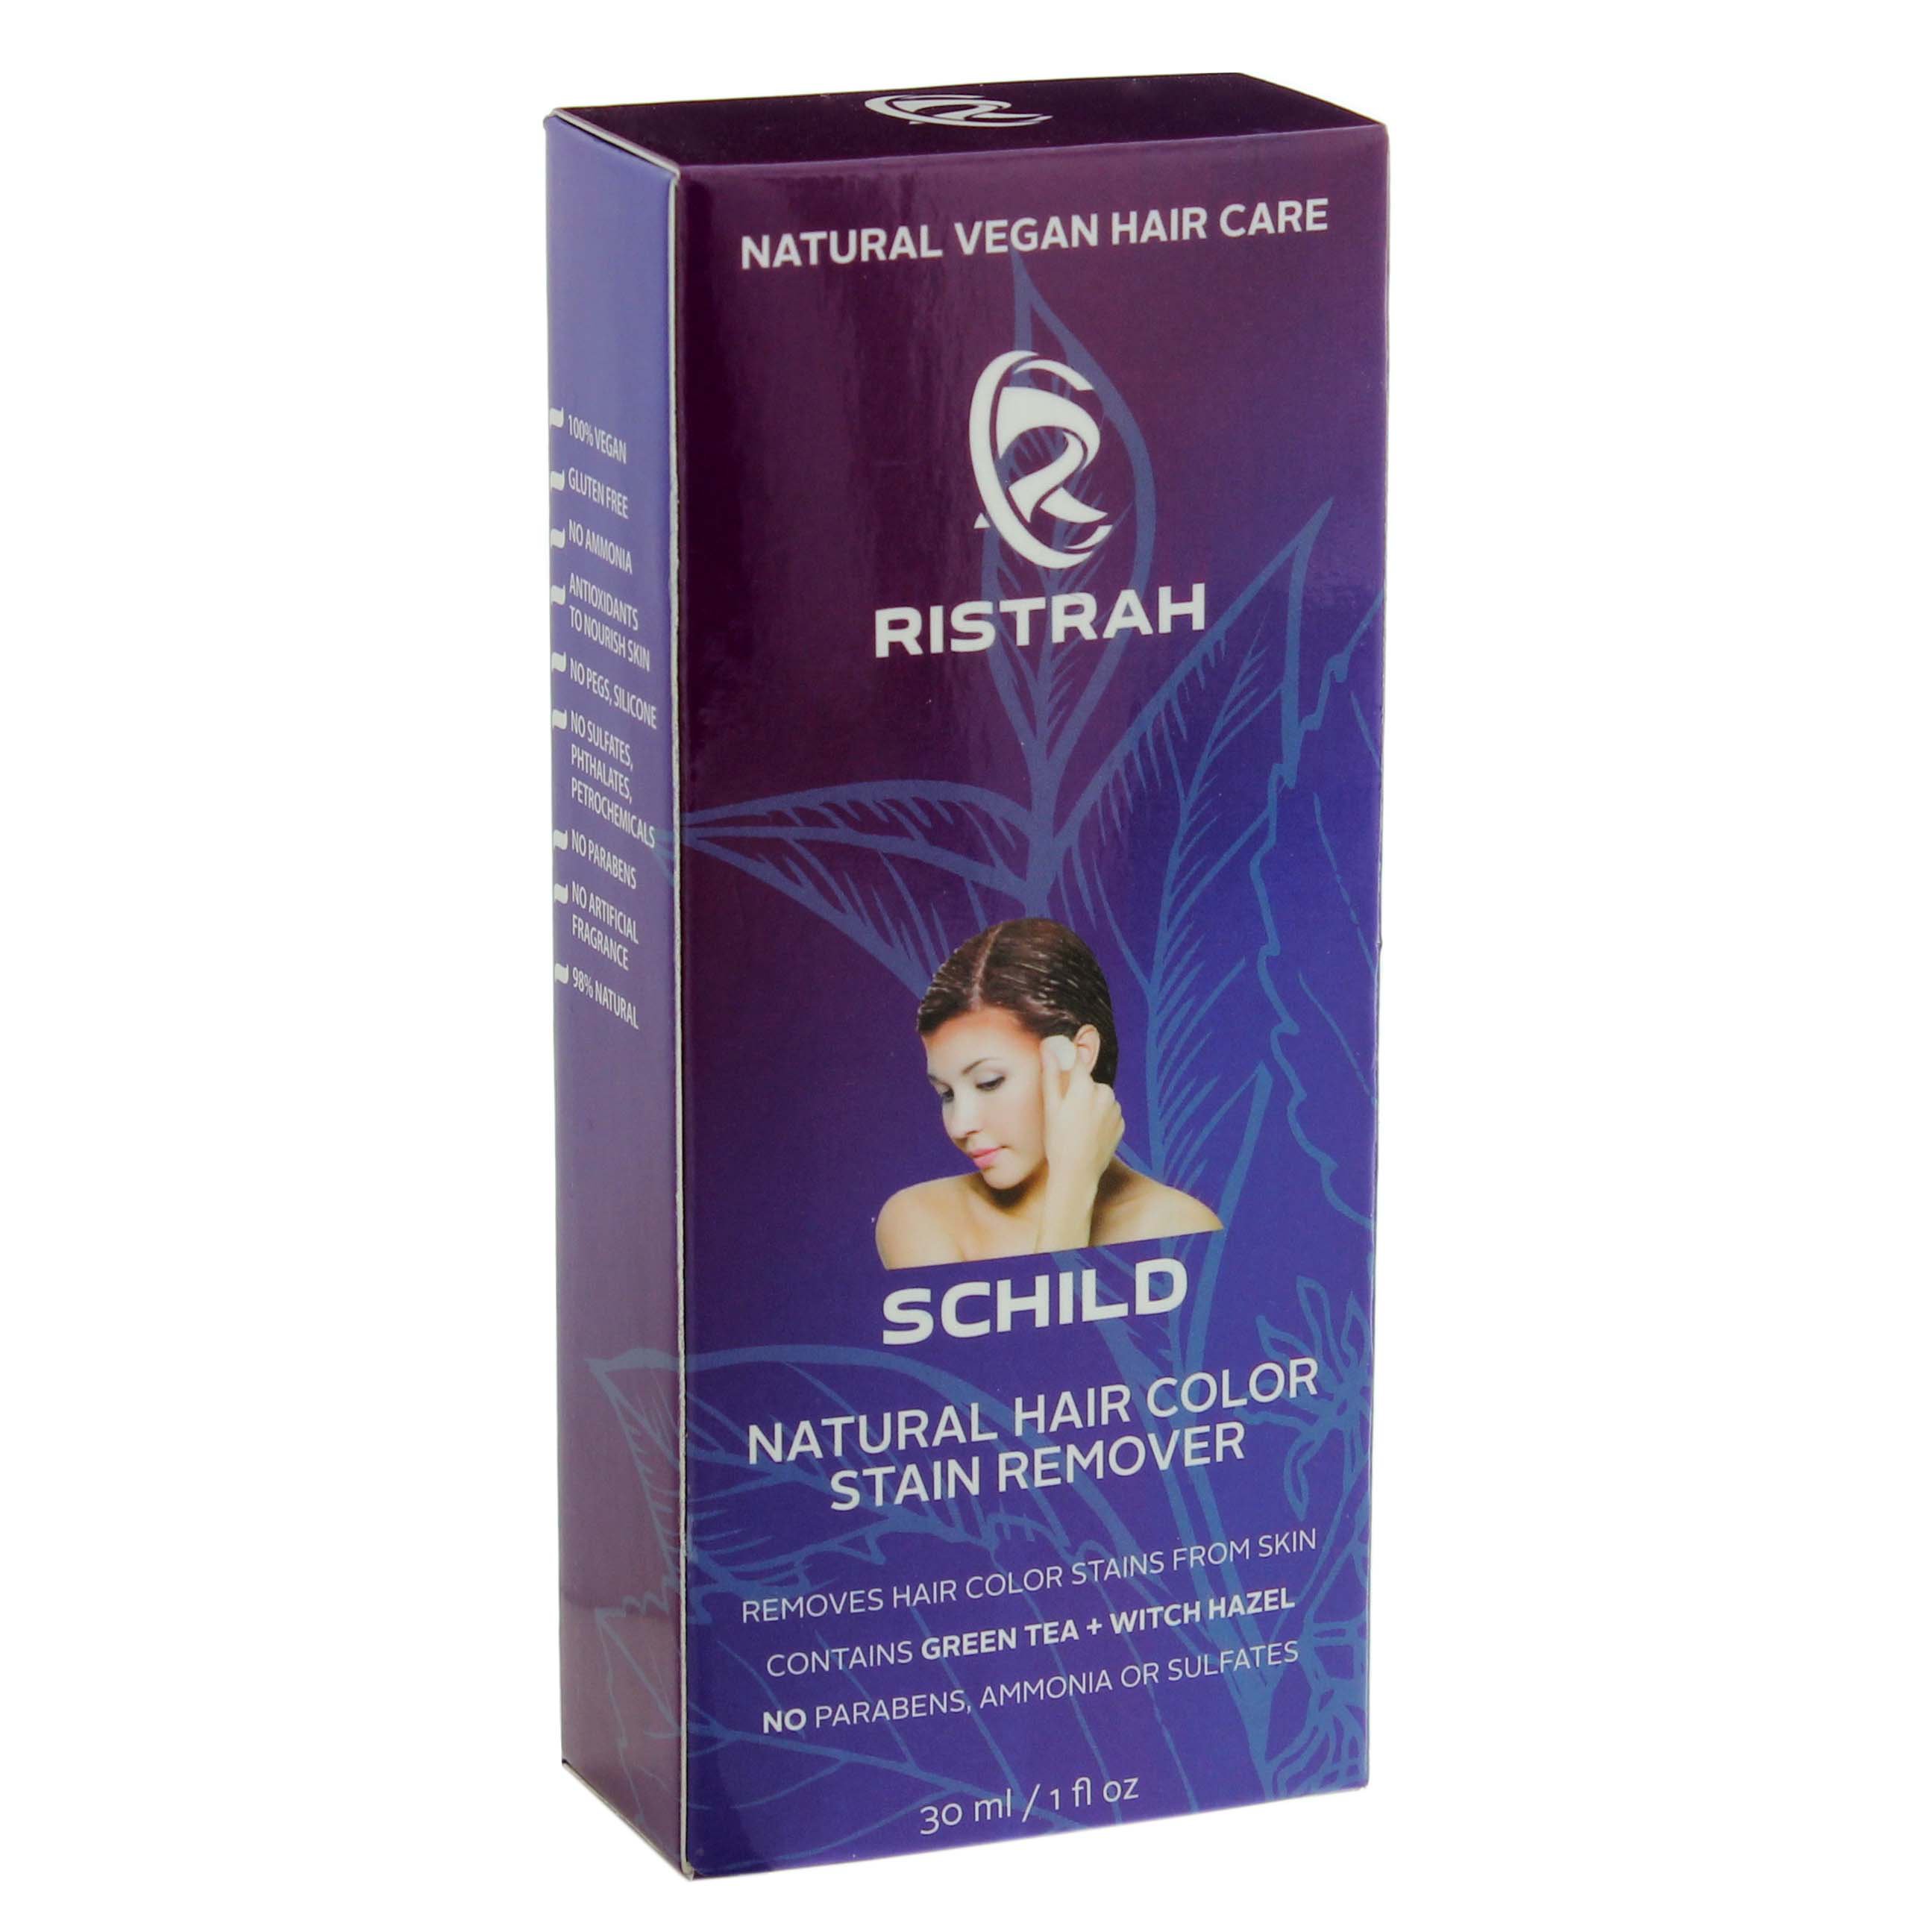 Ristrah Schild Natural Hair Color Stain Remover - Shop Hair Care at H-E-B